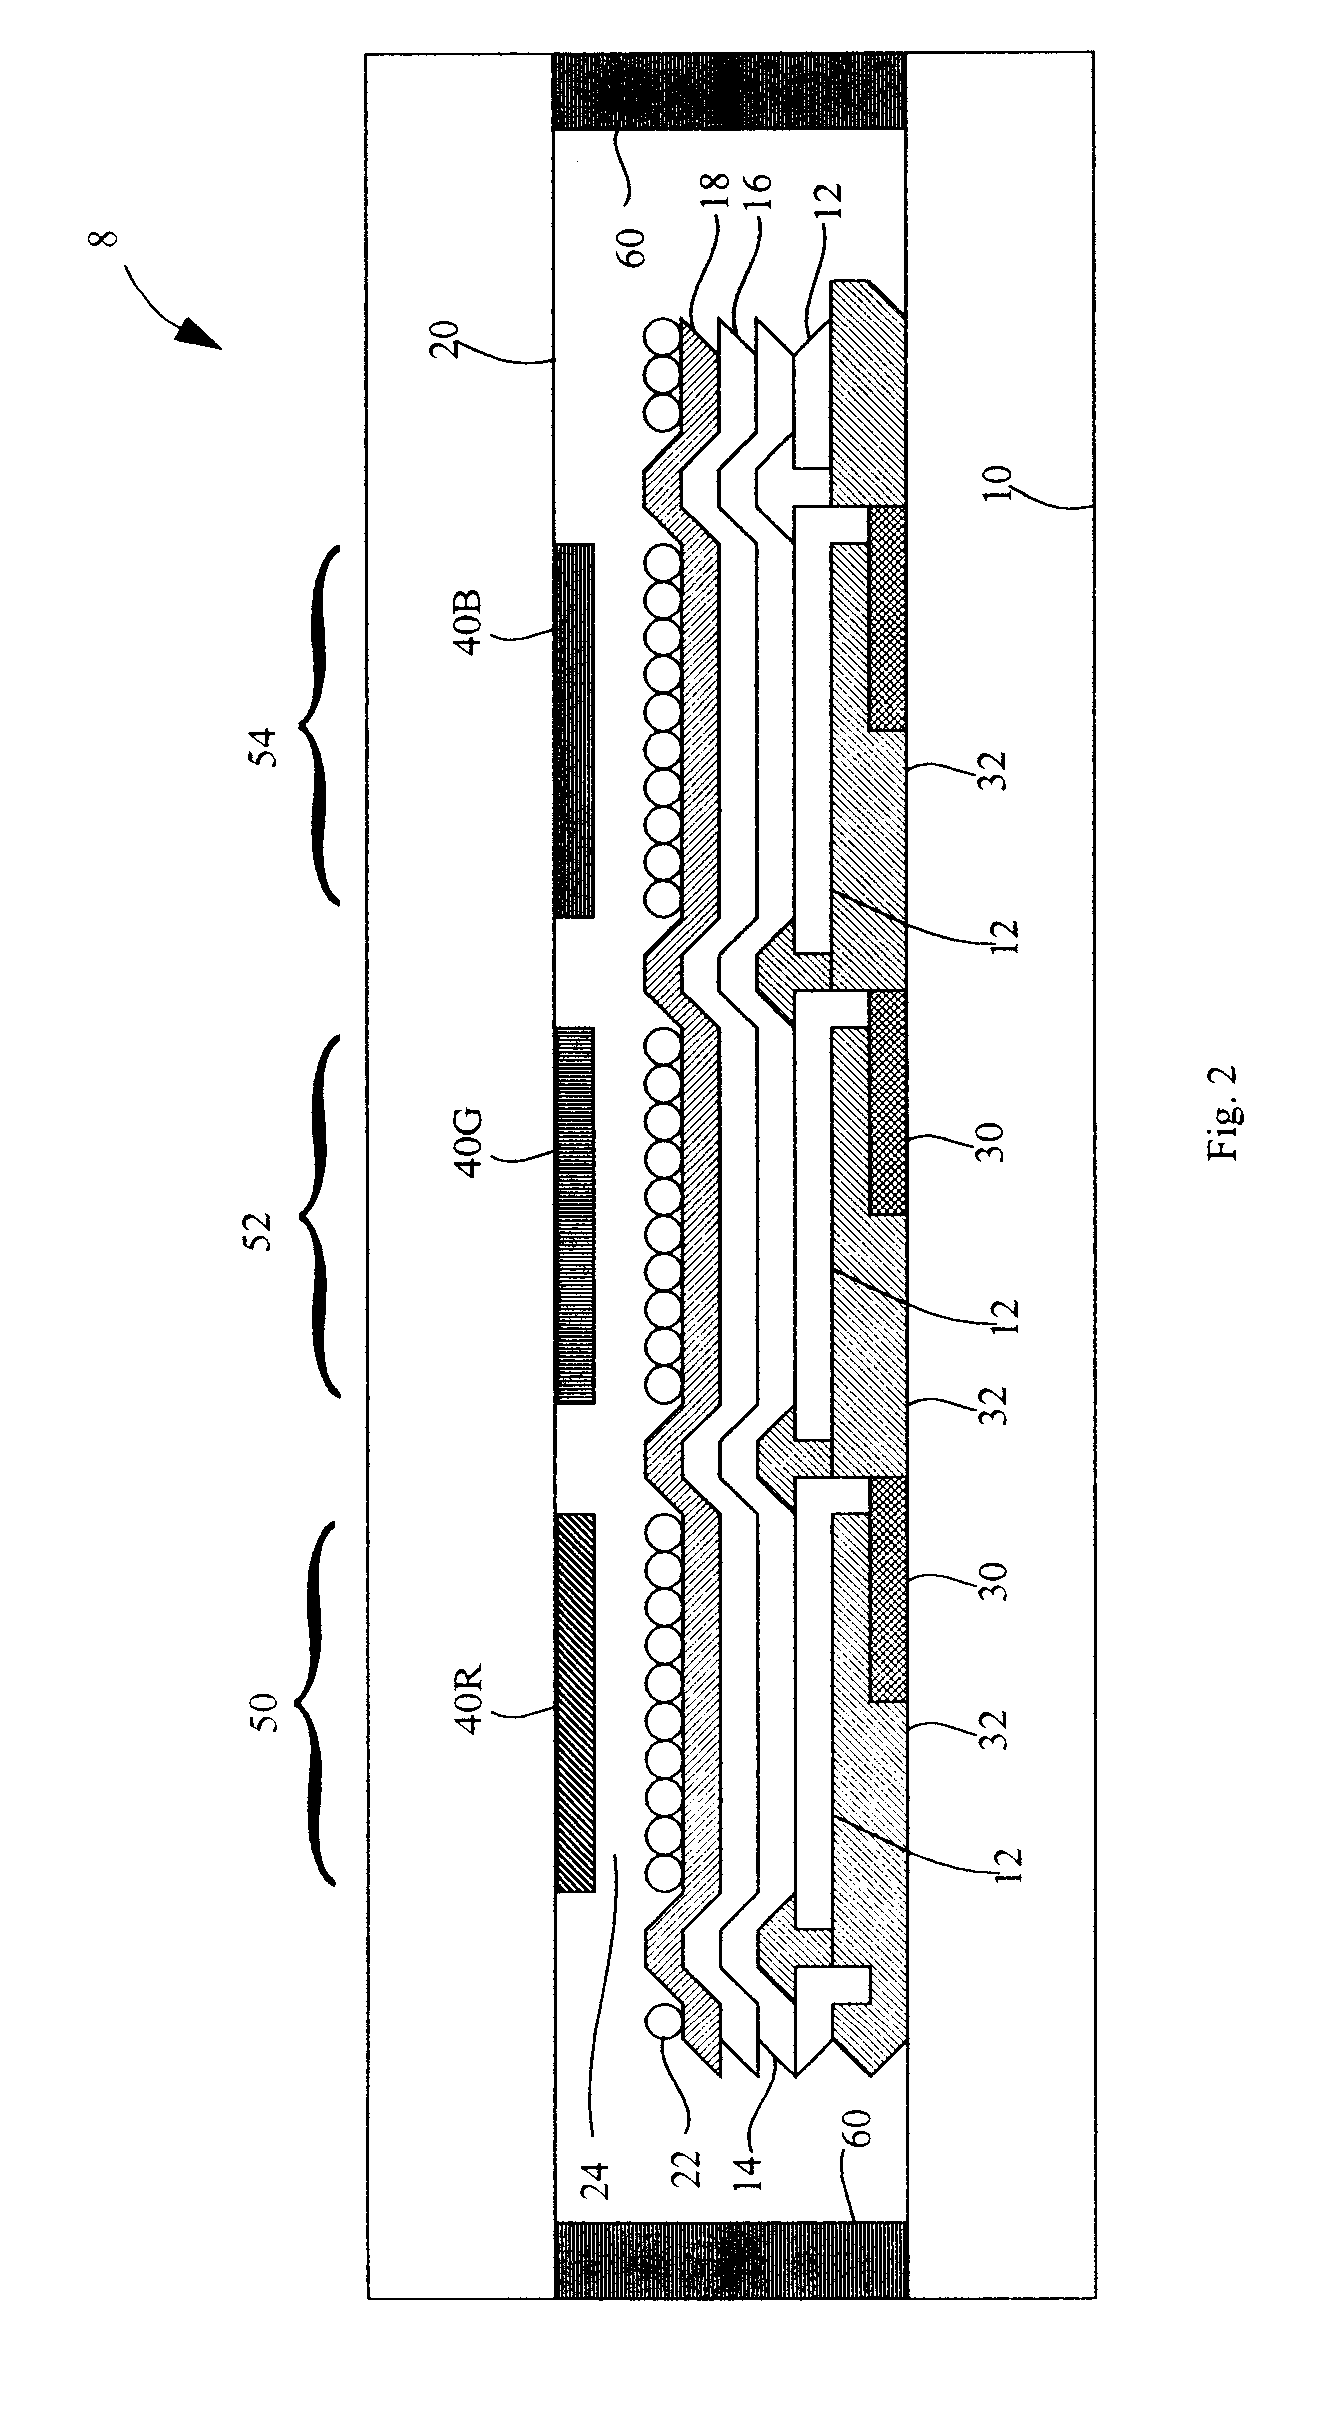 Process for forming OLED conductive protective layer